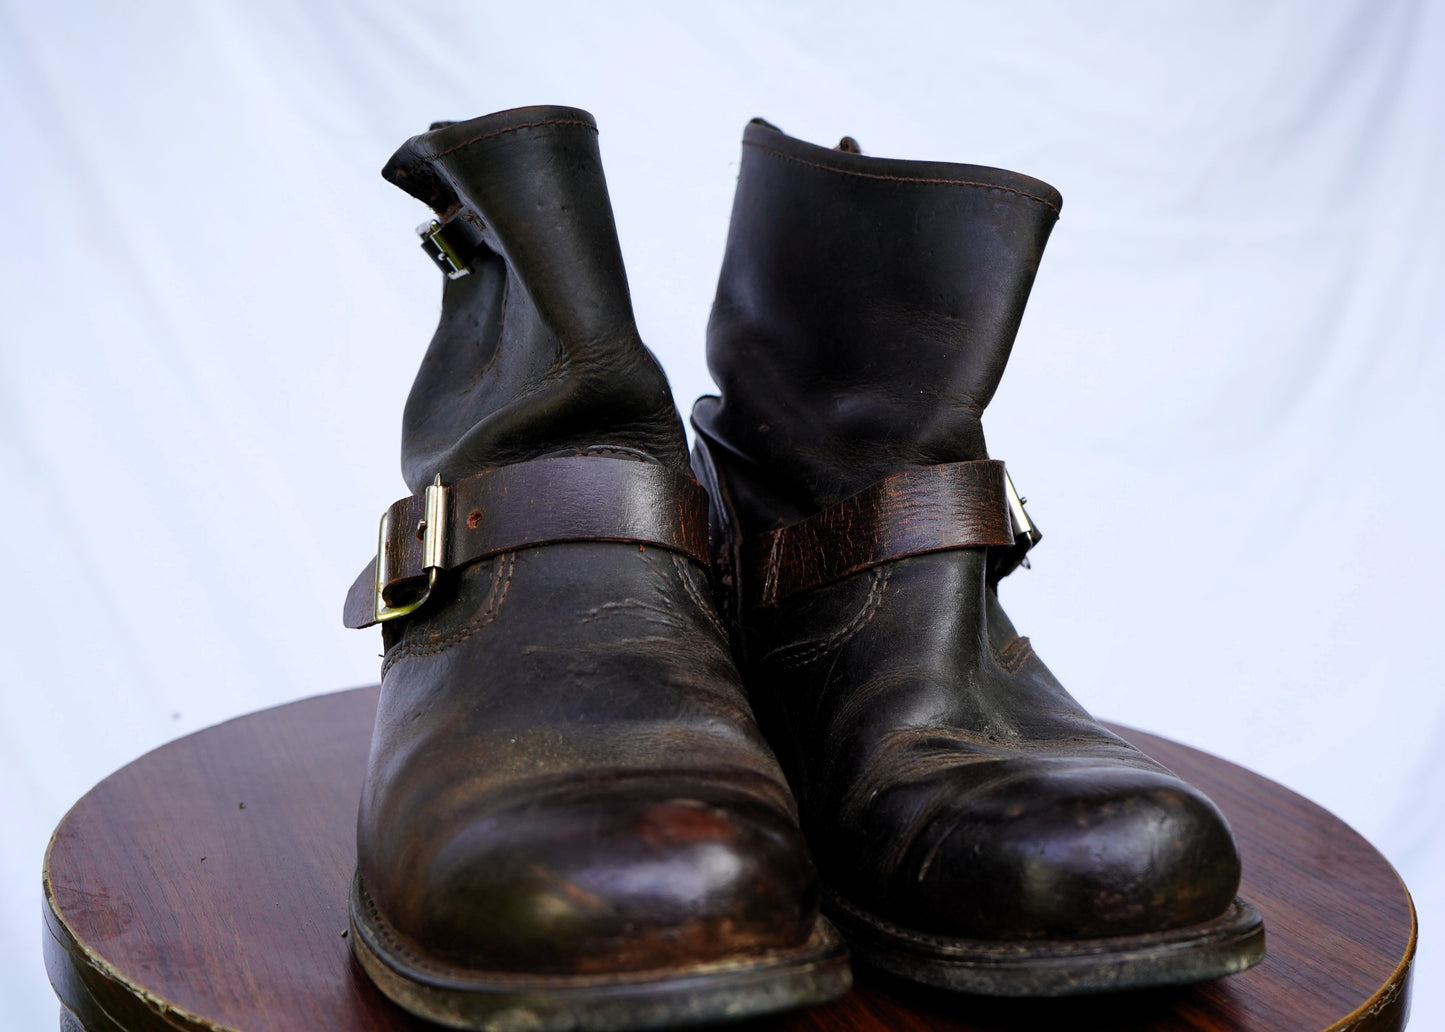 FRYE - Moto Leather Boots